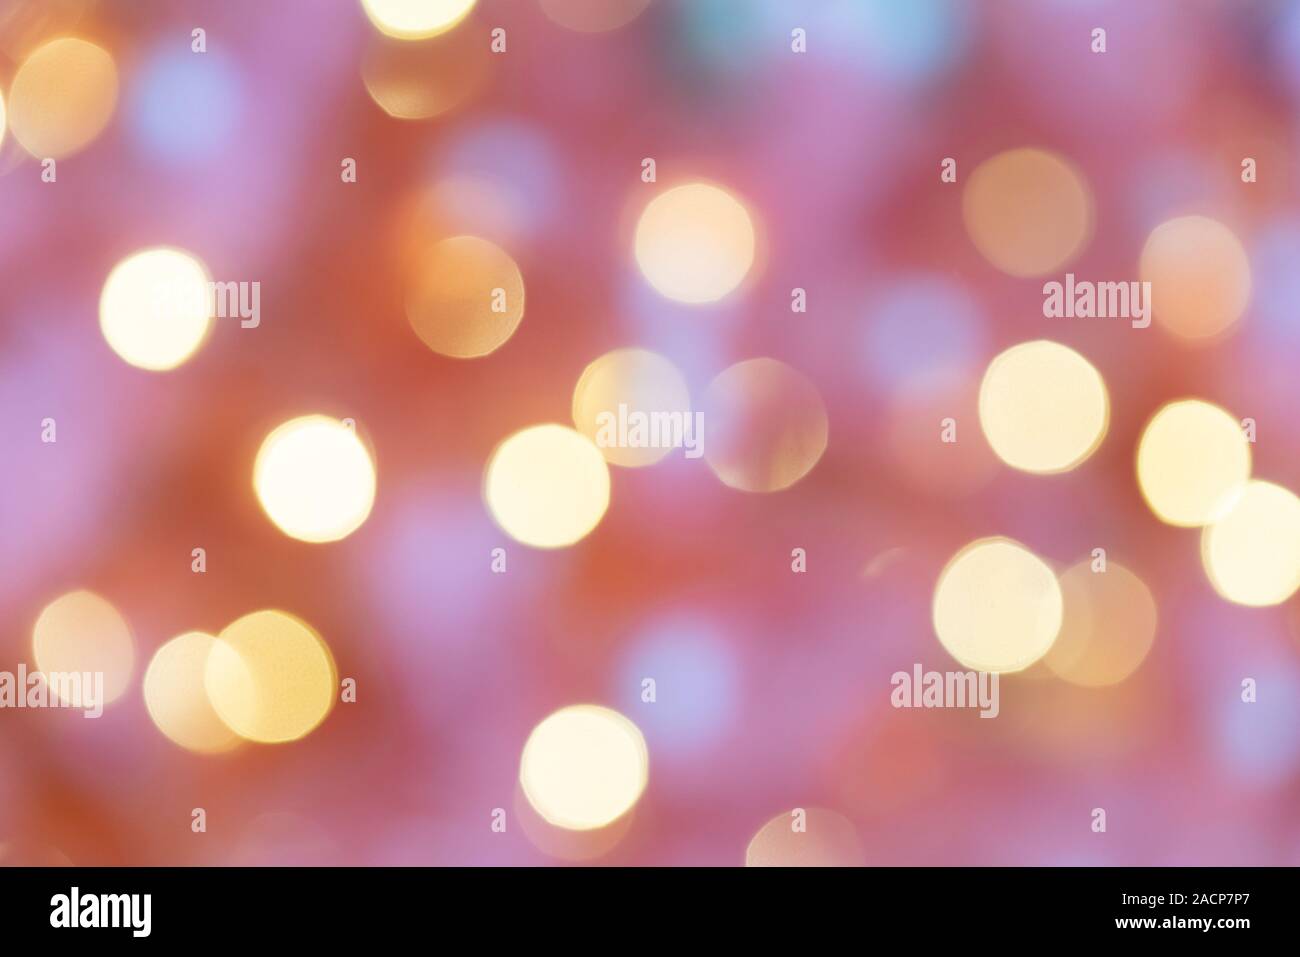 Abstract festive blurry background. Beautiful bokeh. Camera lenses effect. Round spots of light. Stock Photo